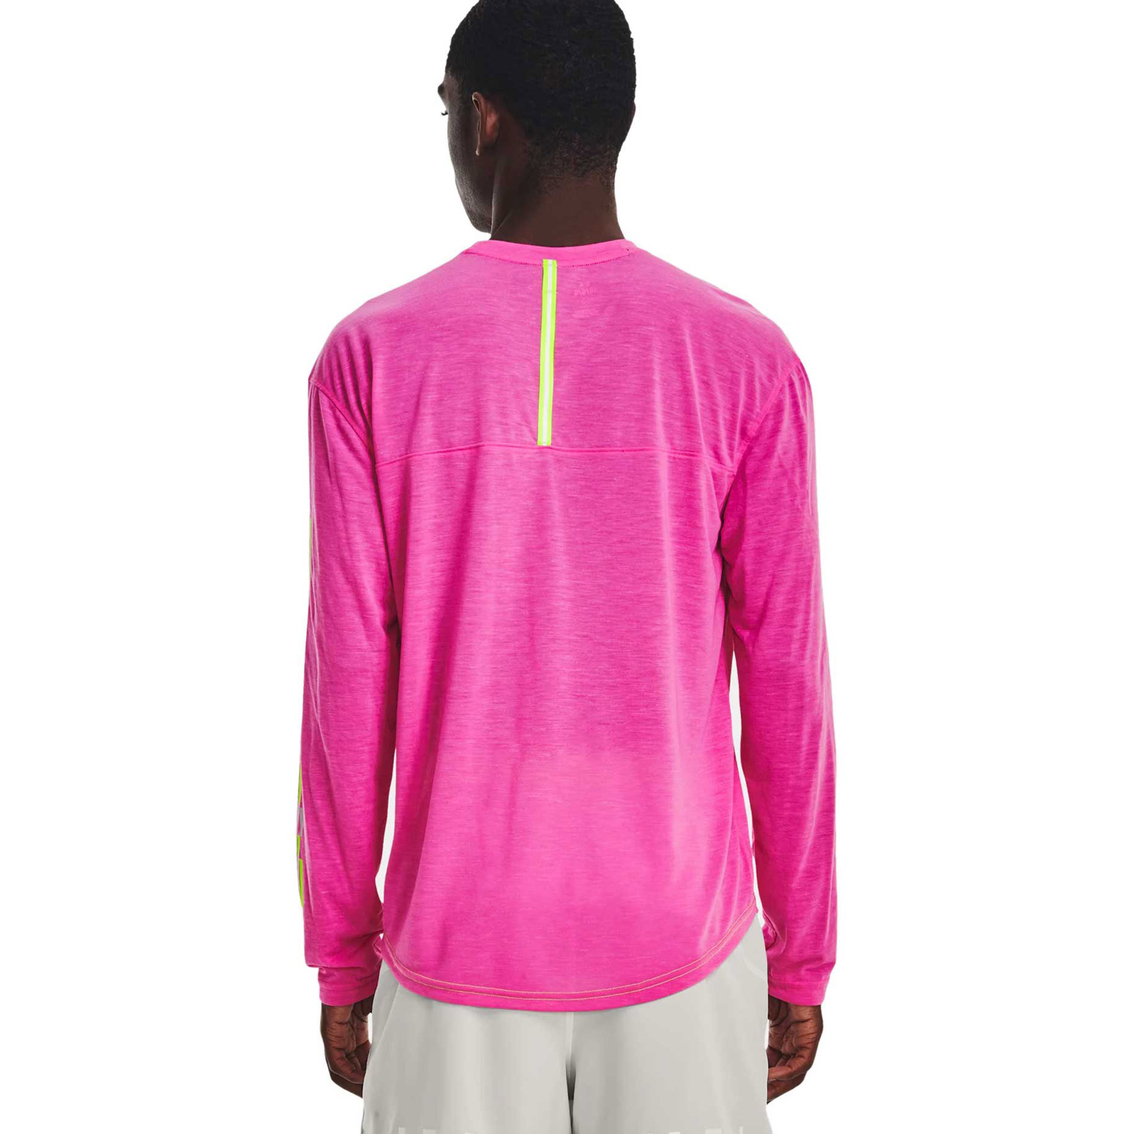 Under Armour Run Anywhere Breeze Shirt, Shirts, Clothing & Accessories